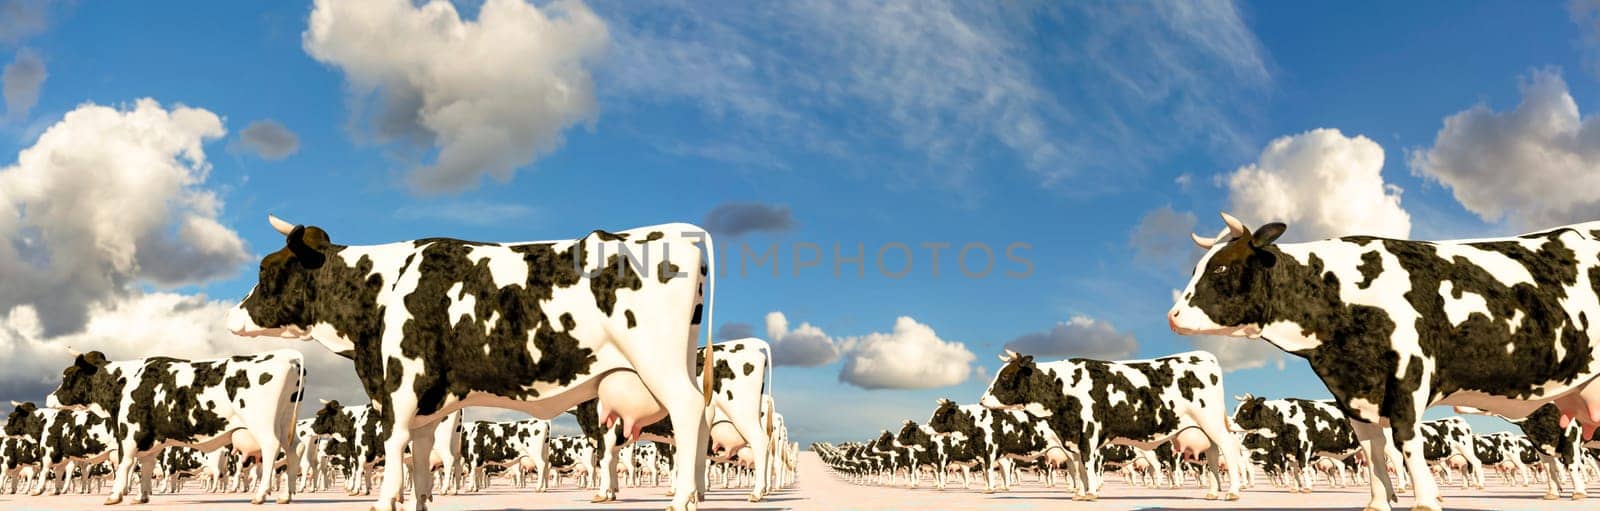 A vast array of dairy cows in repeating patterns stretching to the horizon beneath a blue sky with fluffy clouds.